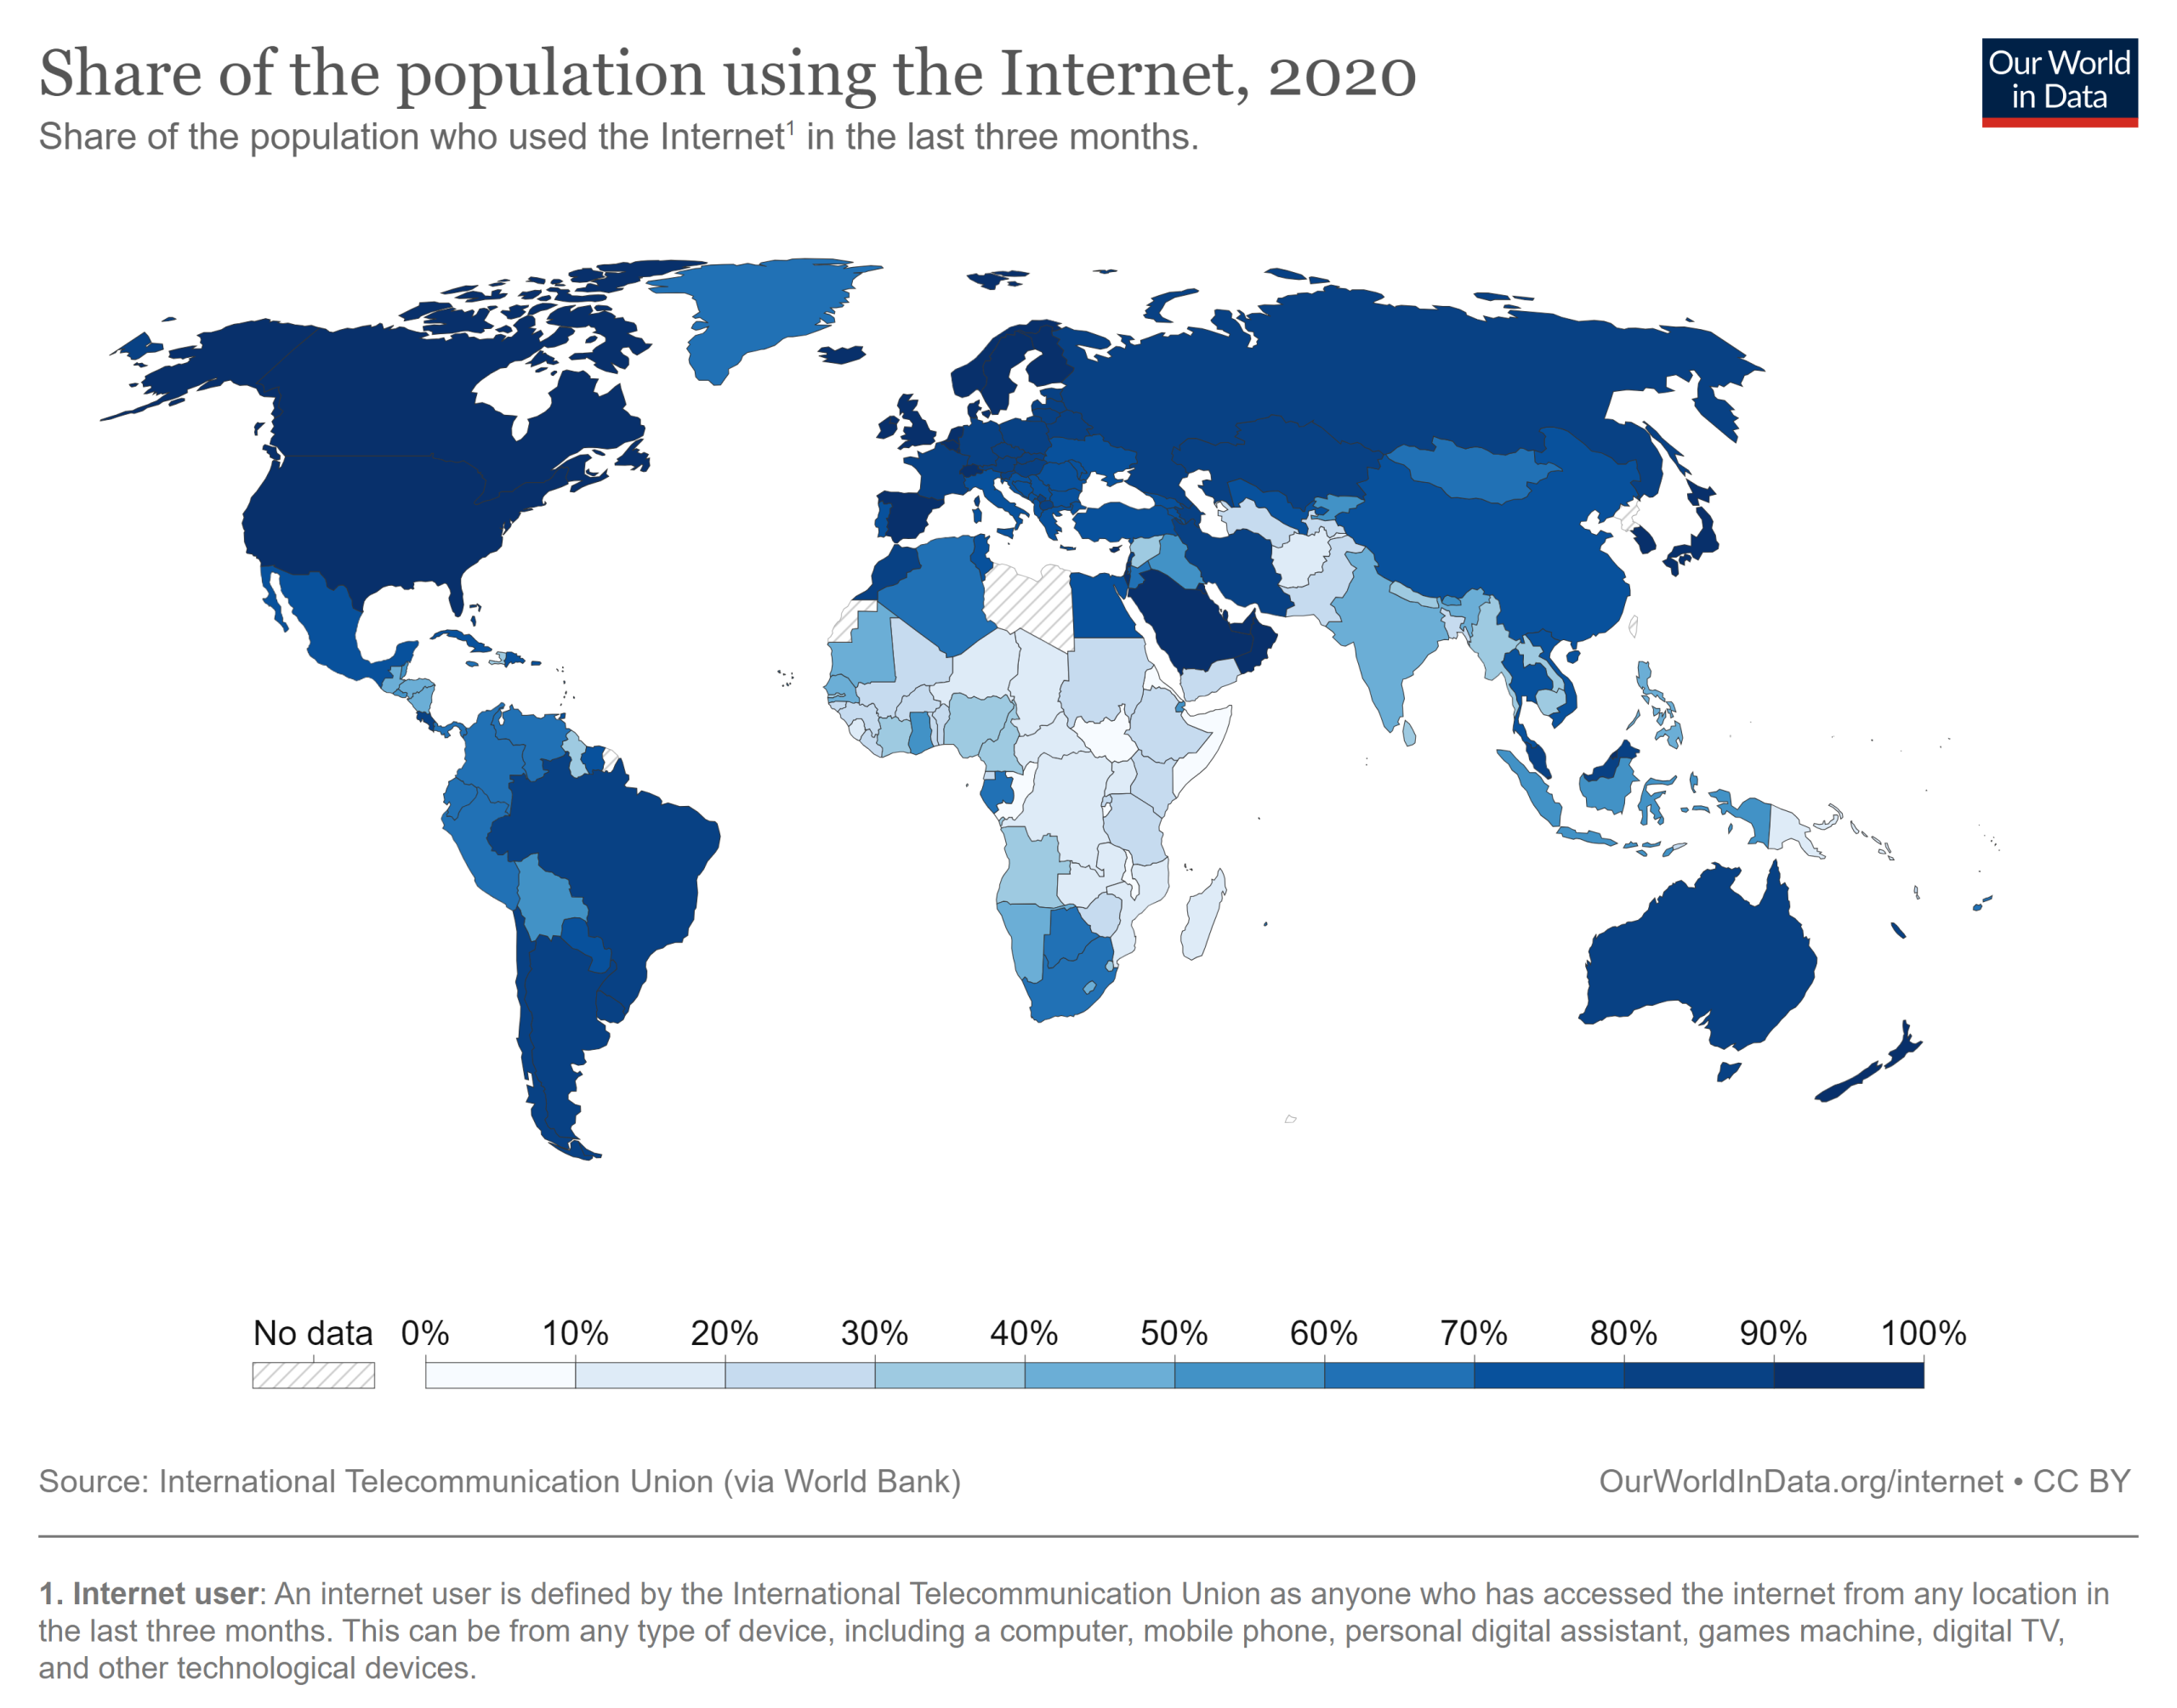 share-of-individuals-using-the-internet-Map